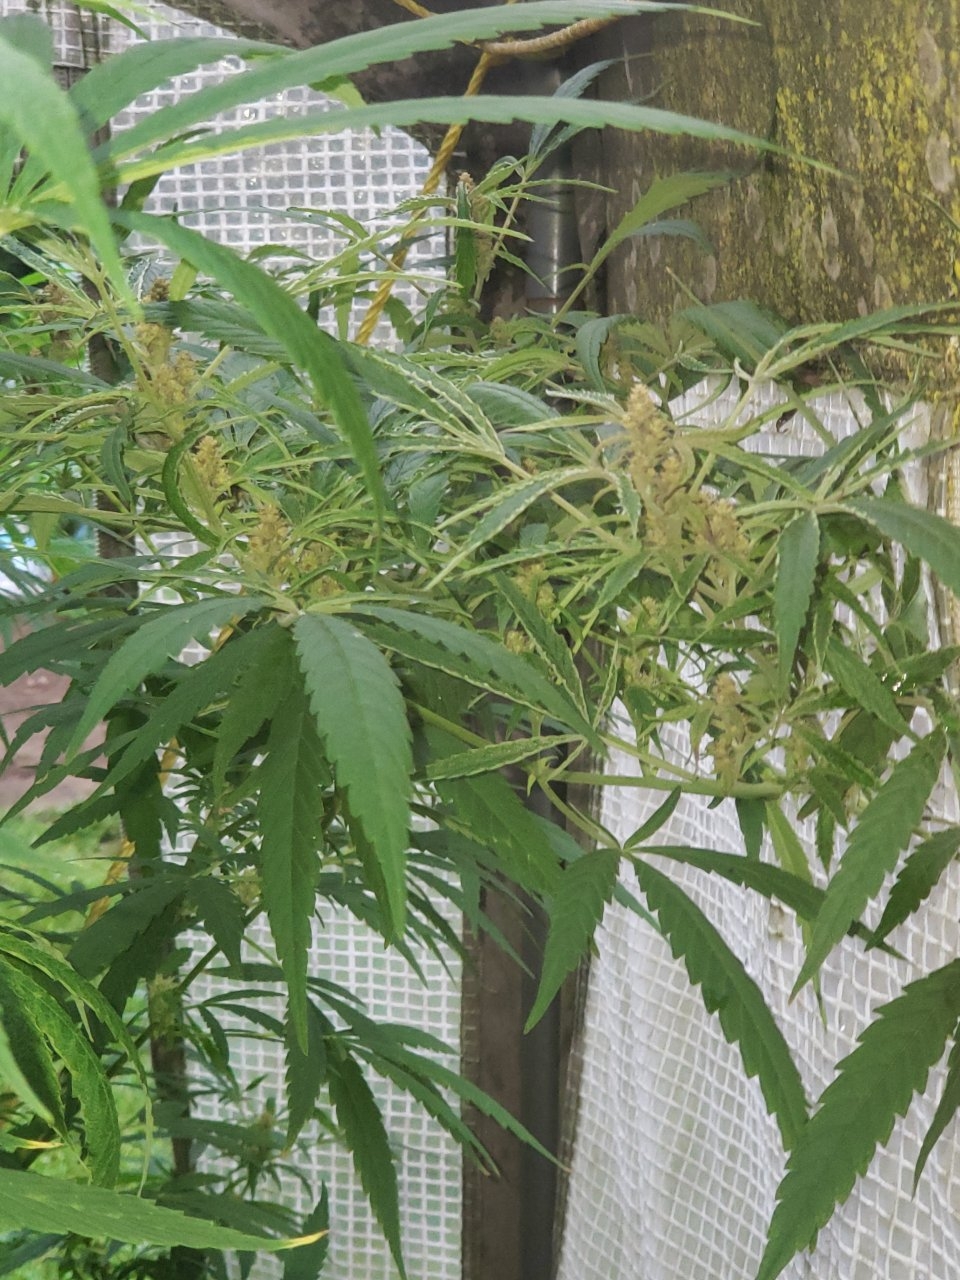 Outdoor Afrodite buds starting to form